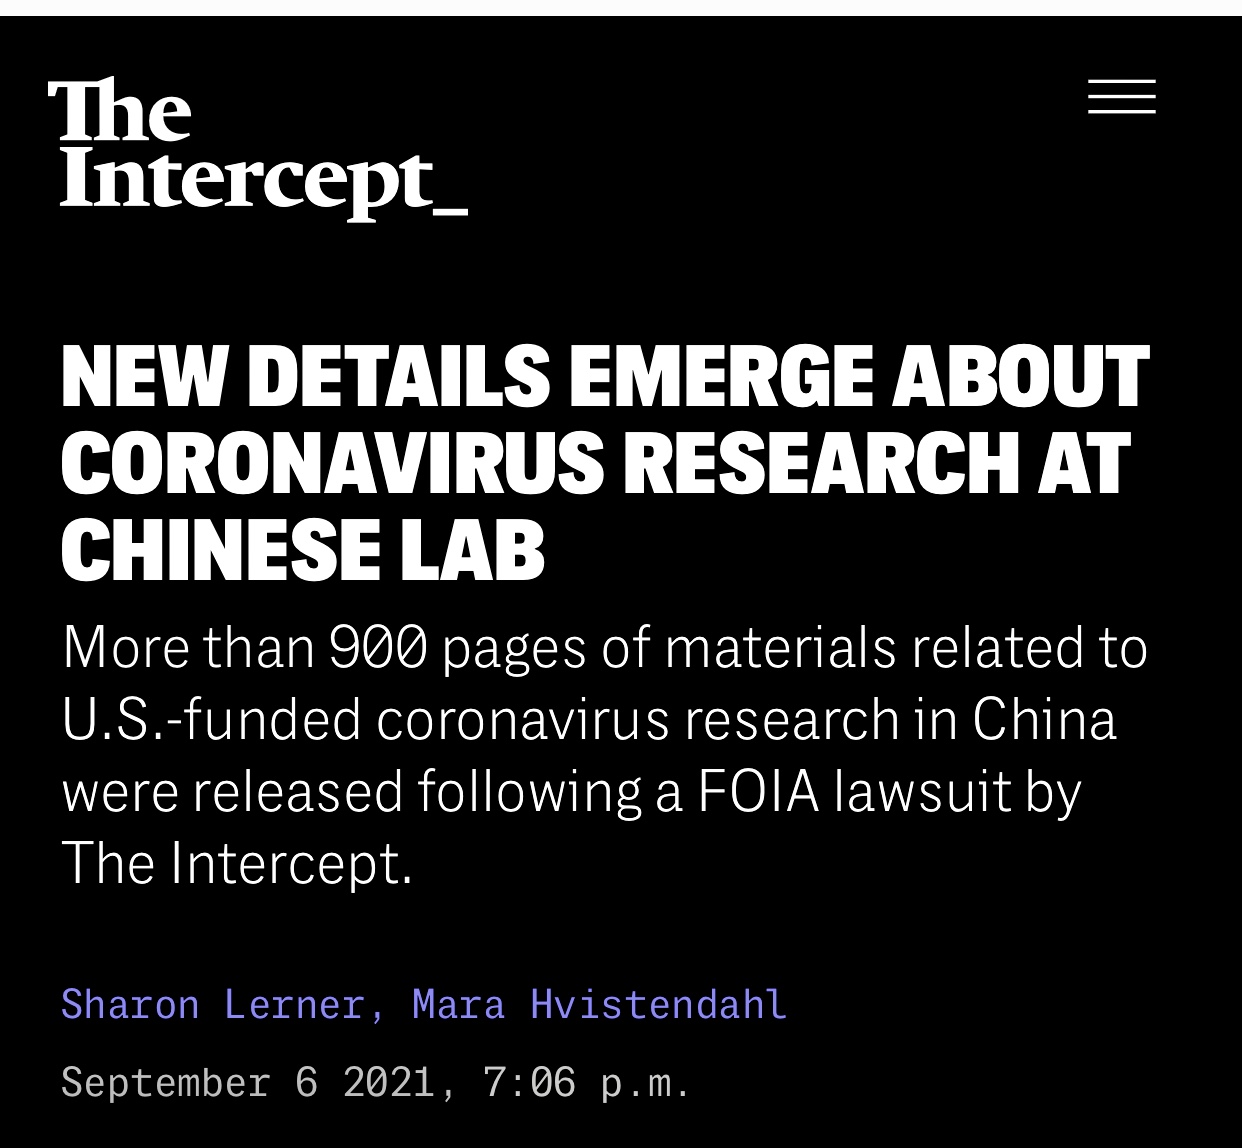 NEW DETAILS EMERGE ABOUT CORONAVIRUS RESEARCH AT CHINESE LAB